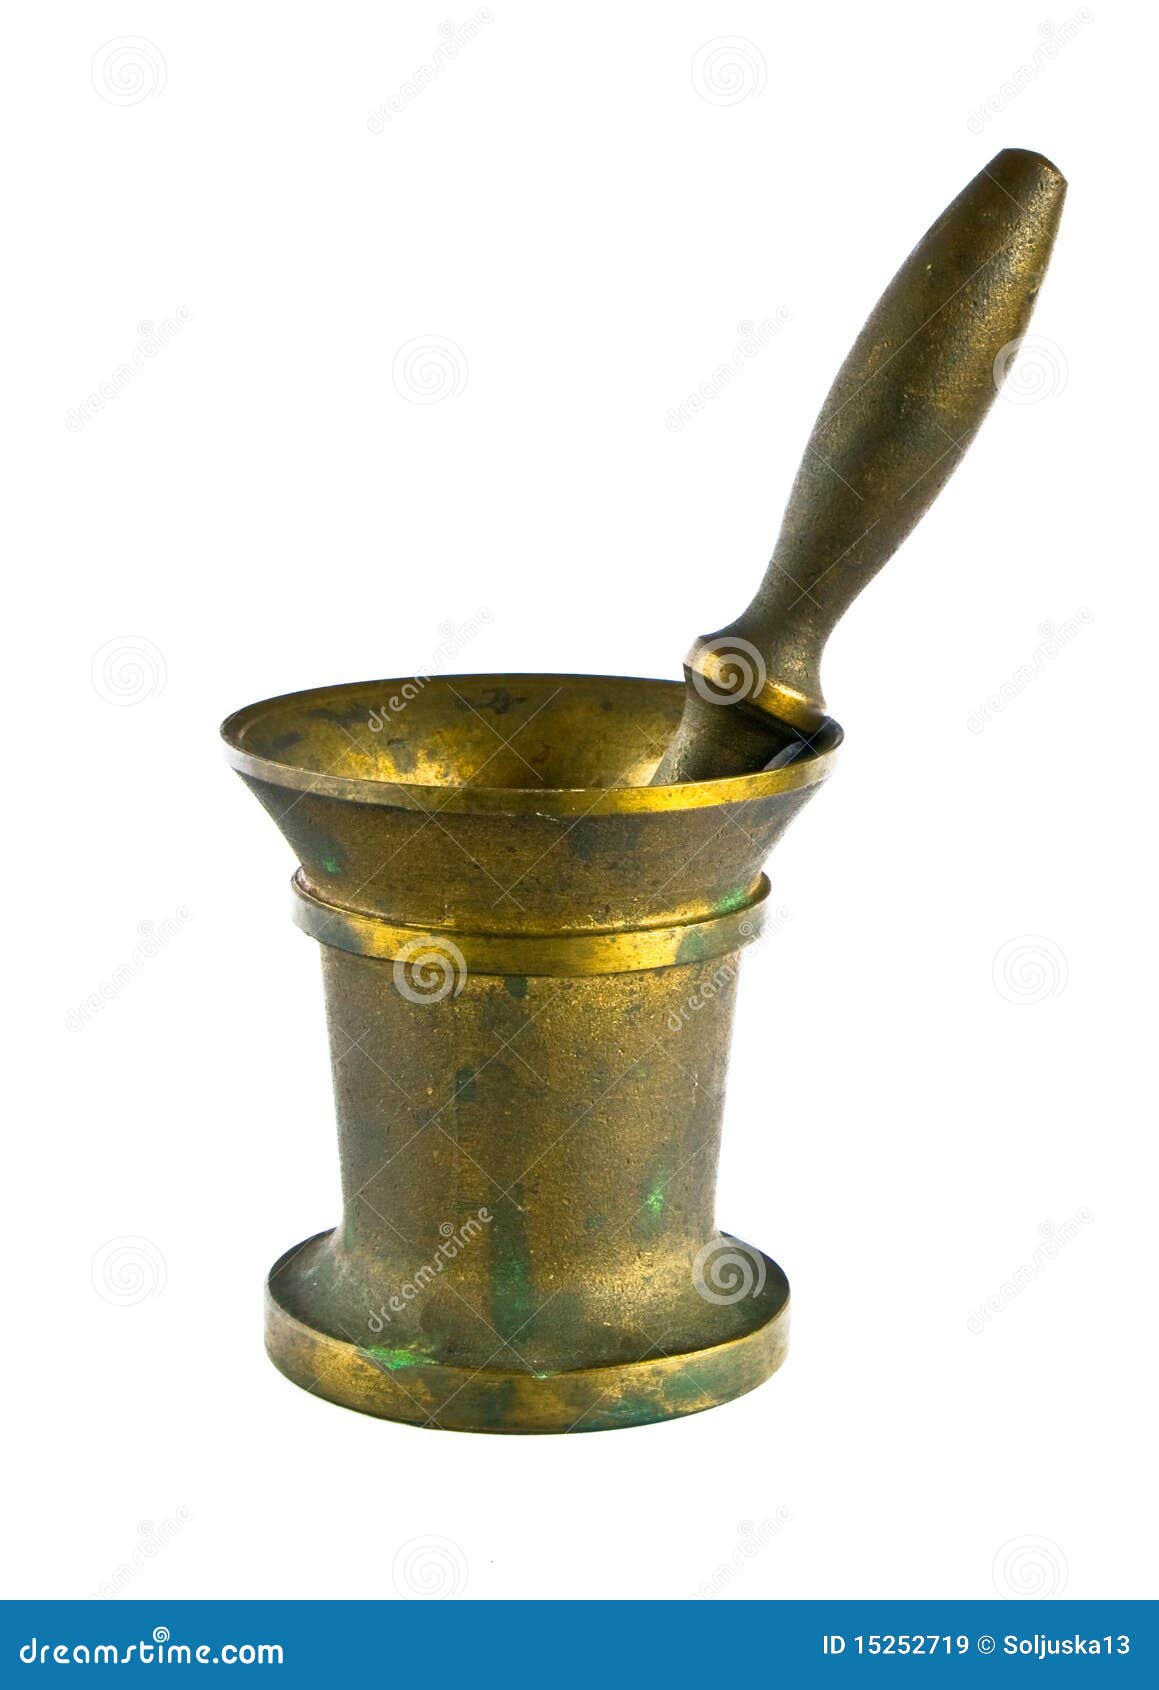 copper mortar on white background